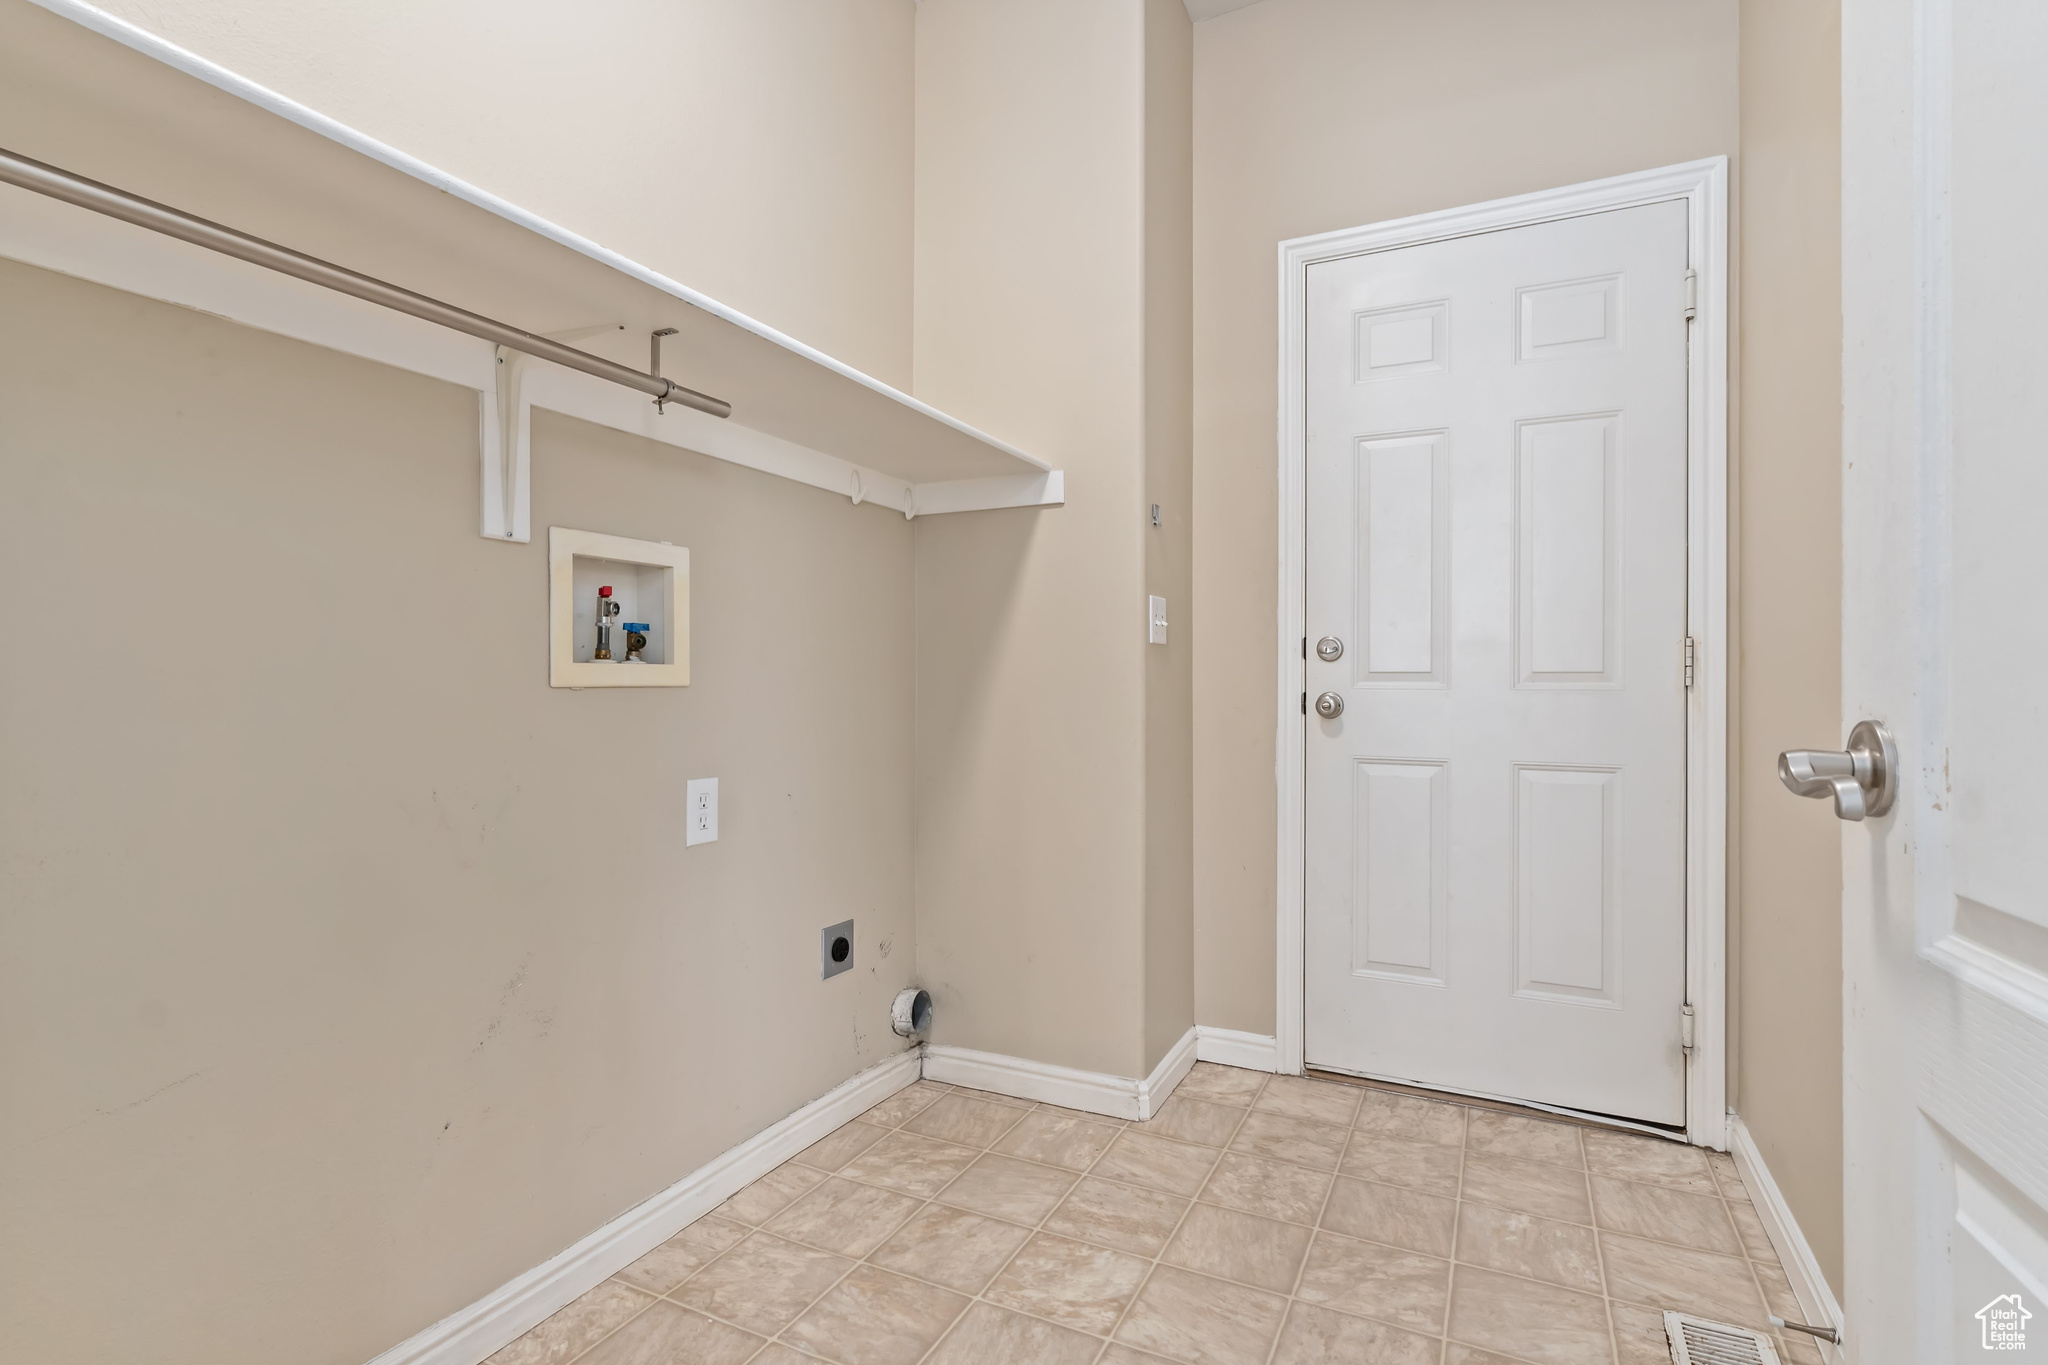 Laundry room featuring light tile floors, hookup for an electric dryer, and washer hookup